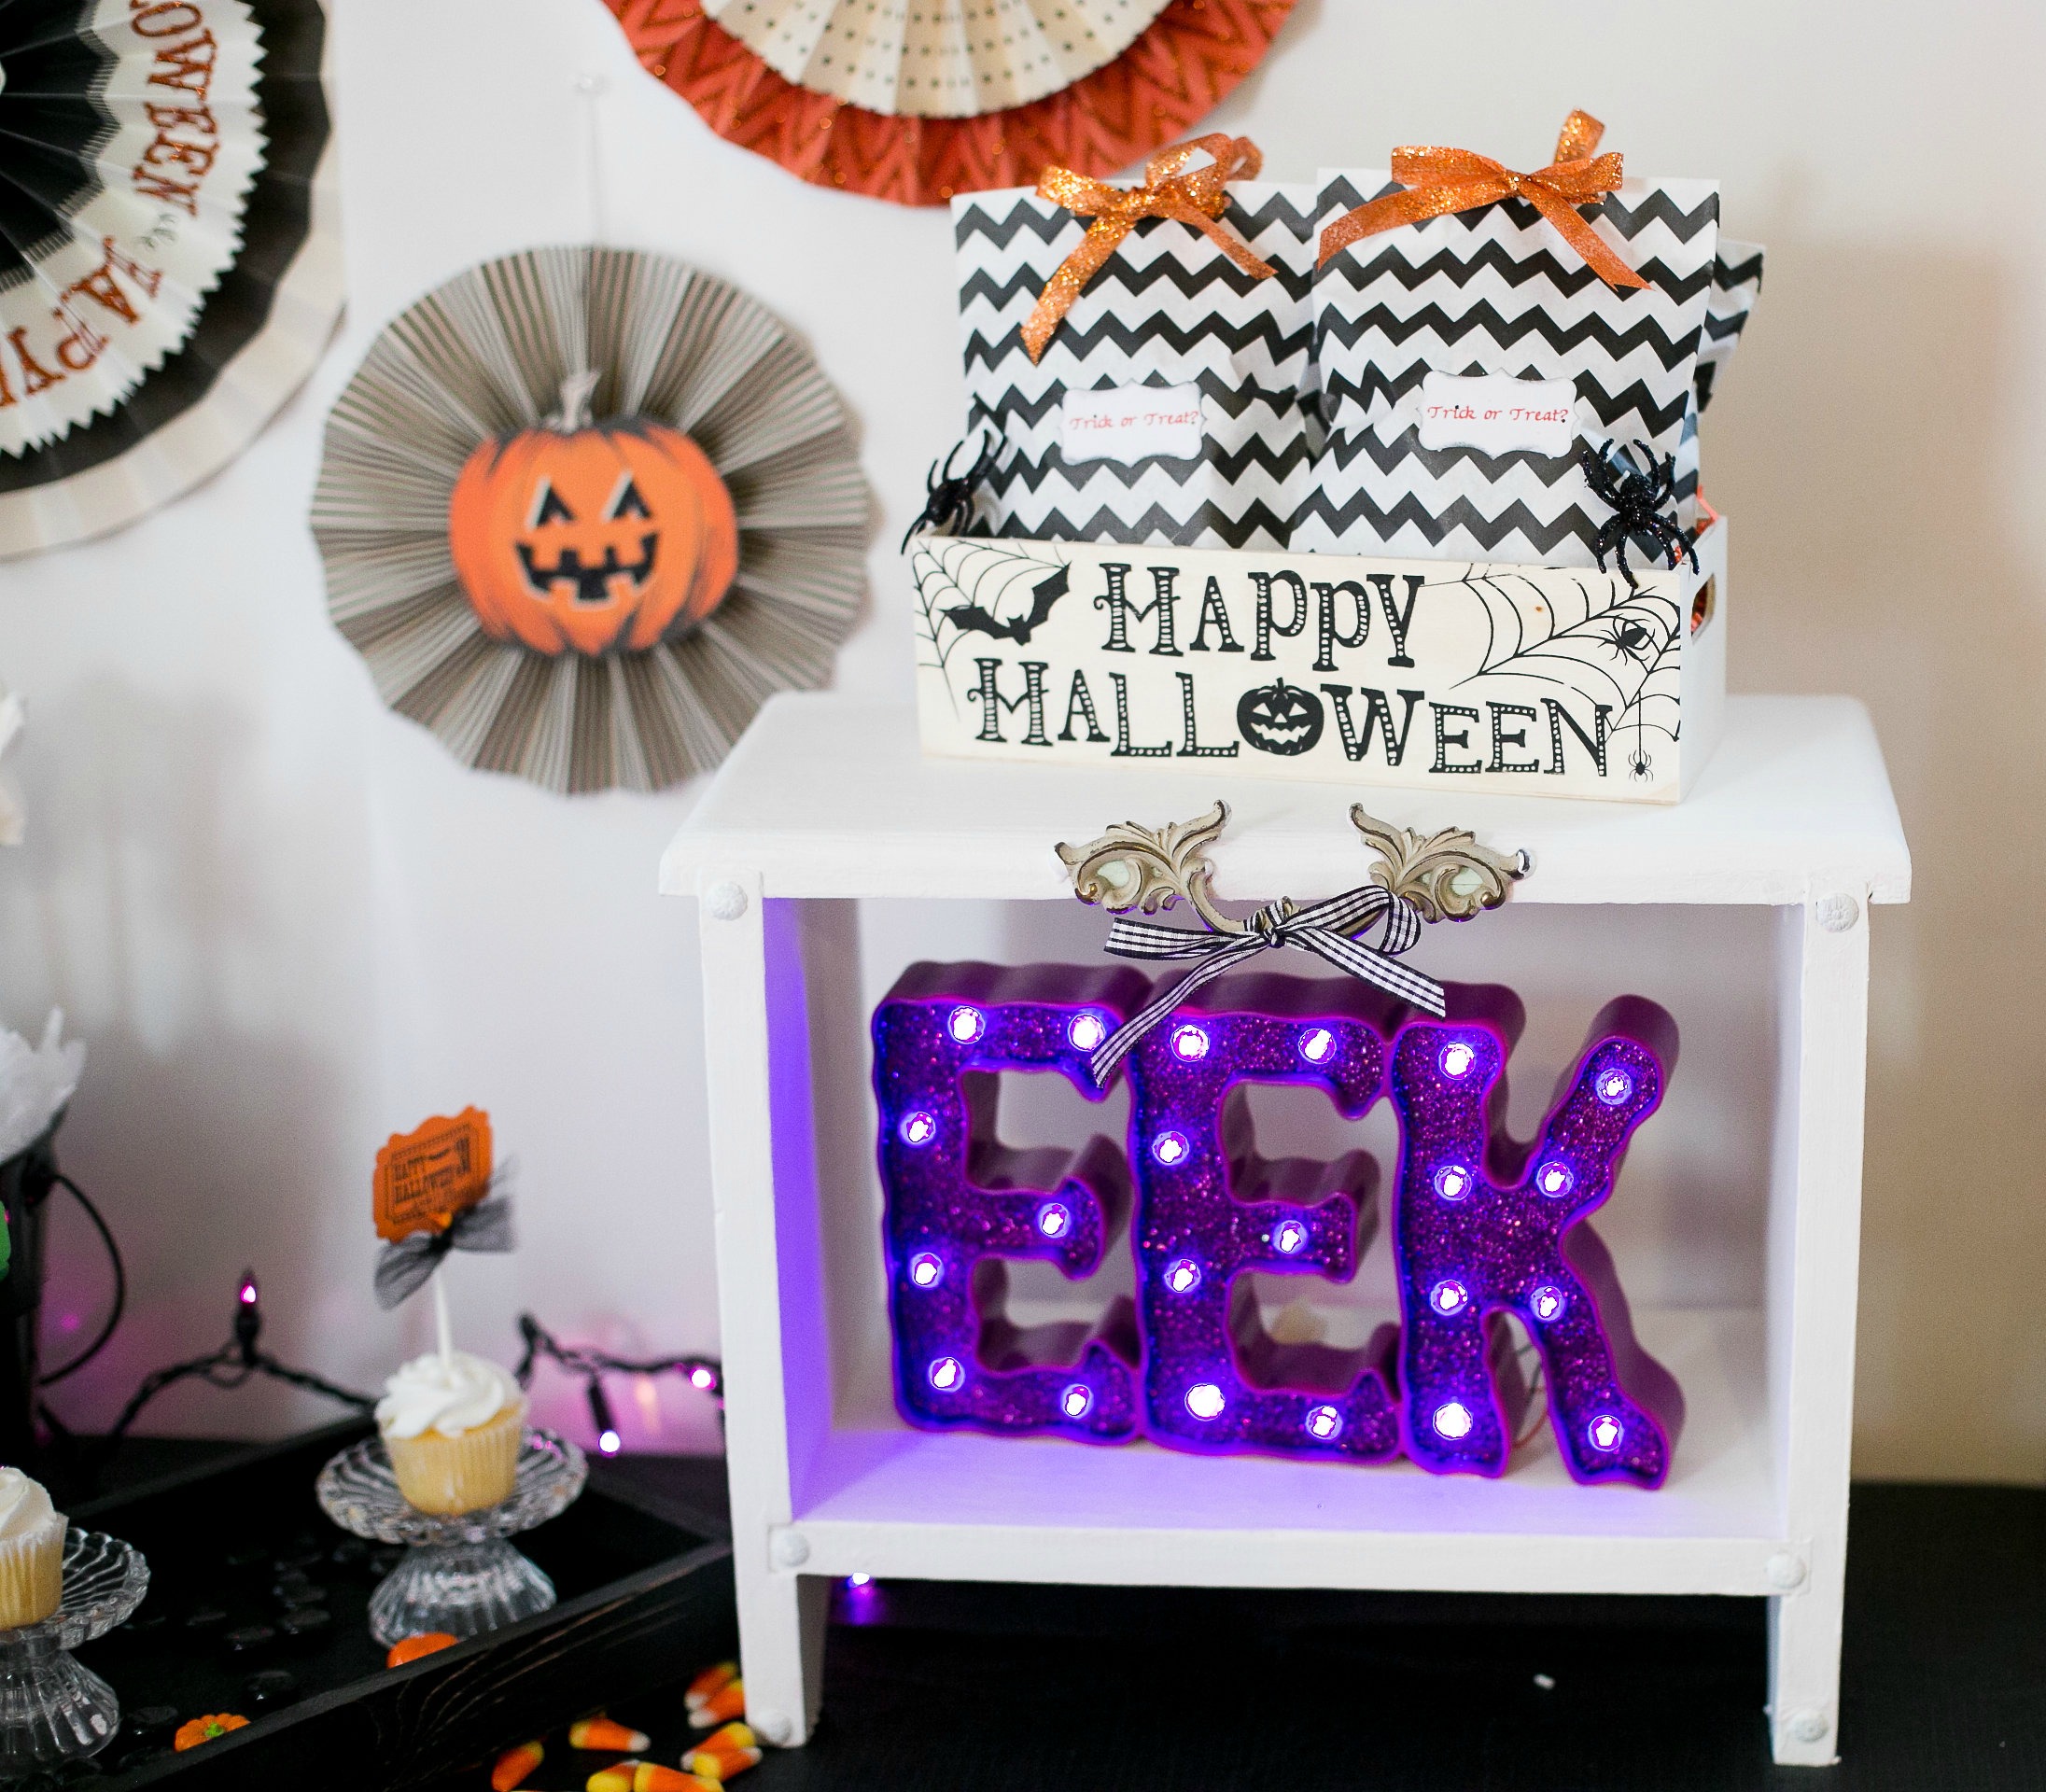 BOO! SCARE UP SOME FUN WITH A NEIGHBORHOOD HALLOWEEN COSTUME PARTY